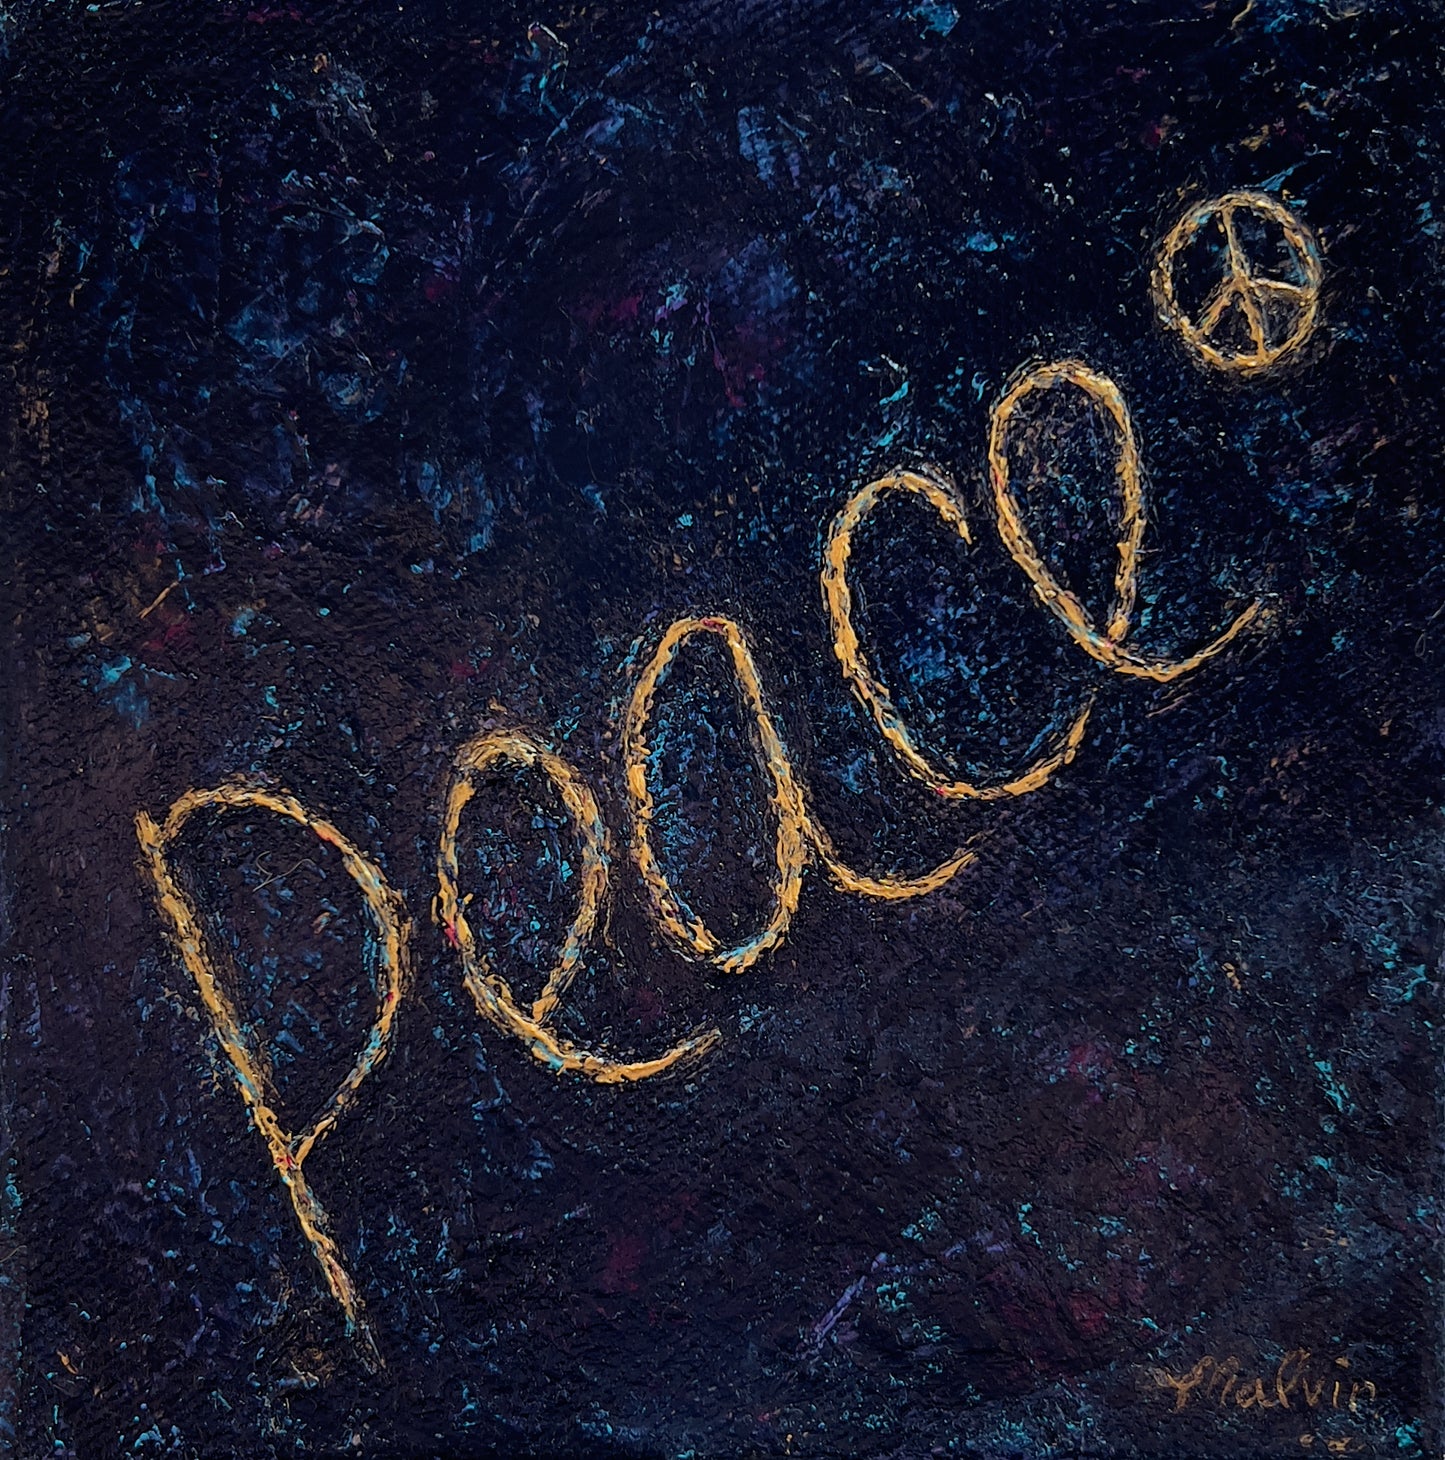 End-Stopped Peace | 8x8